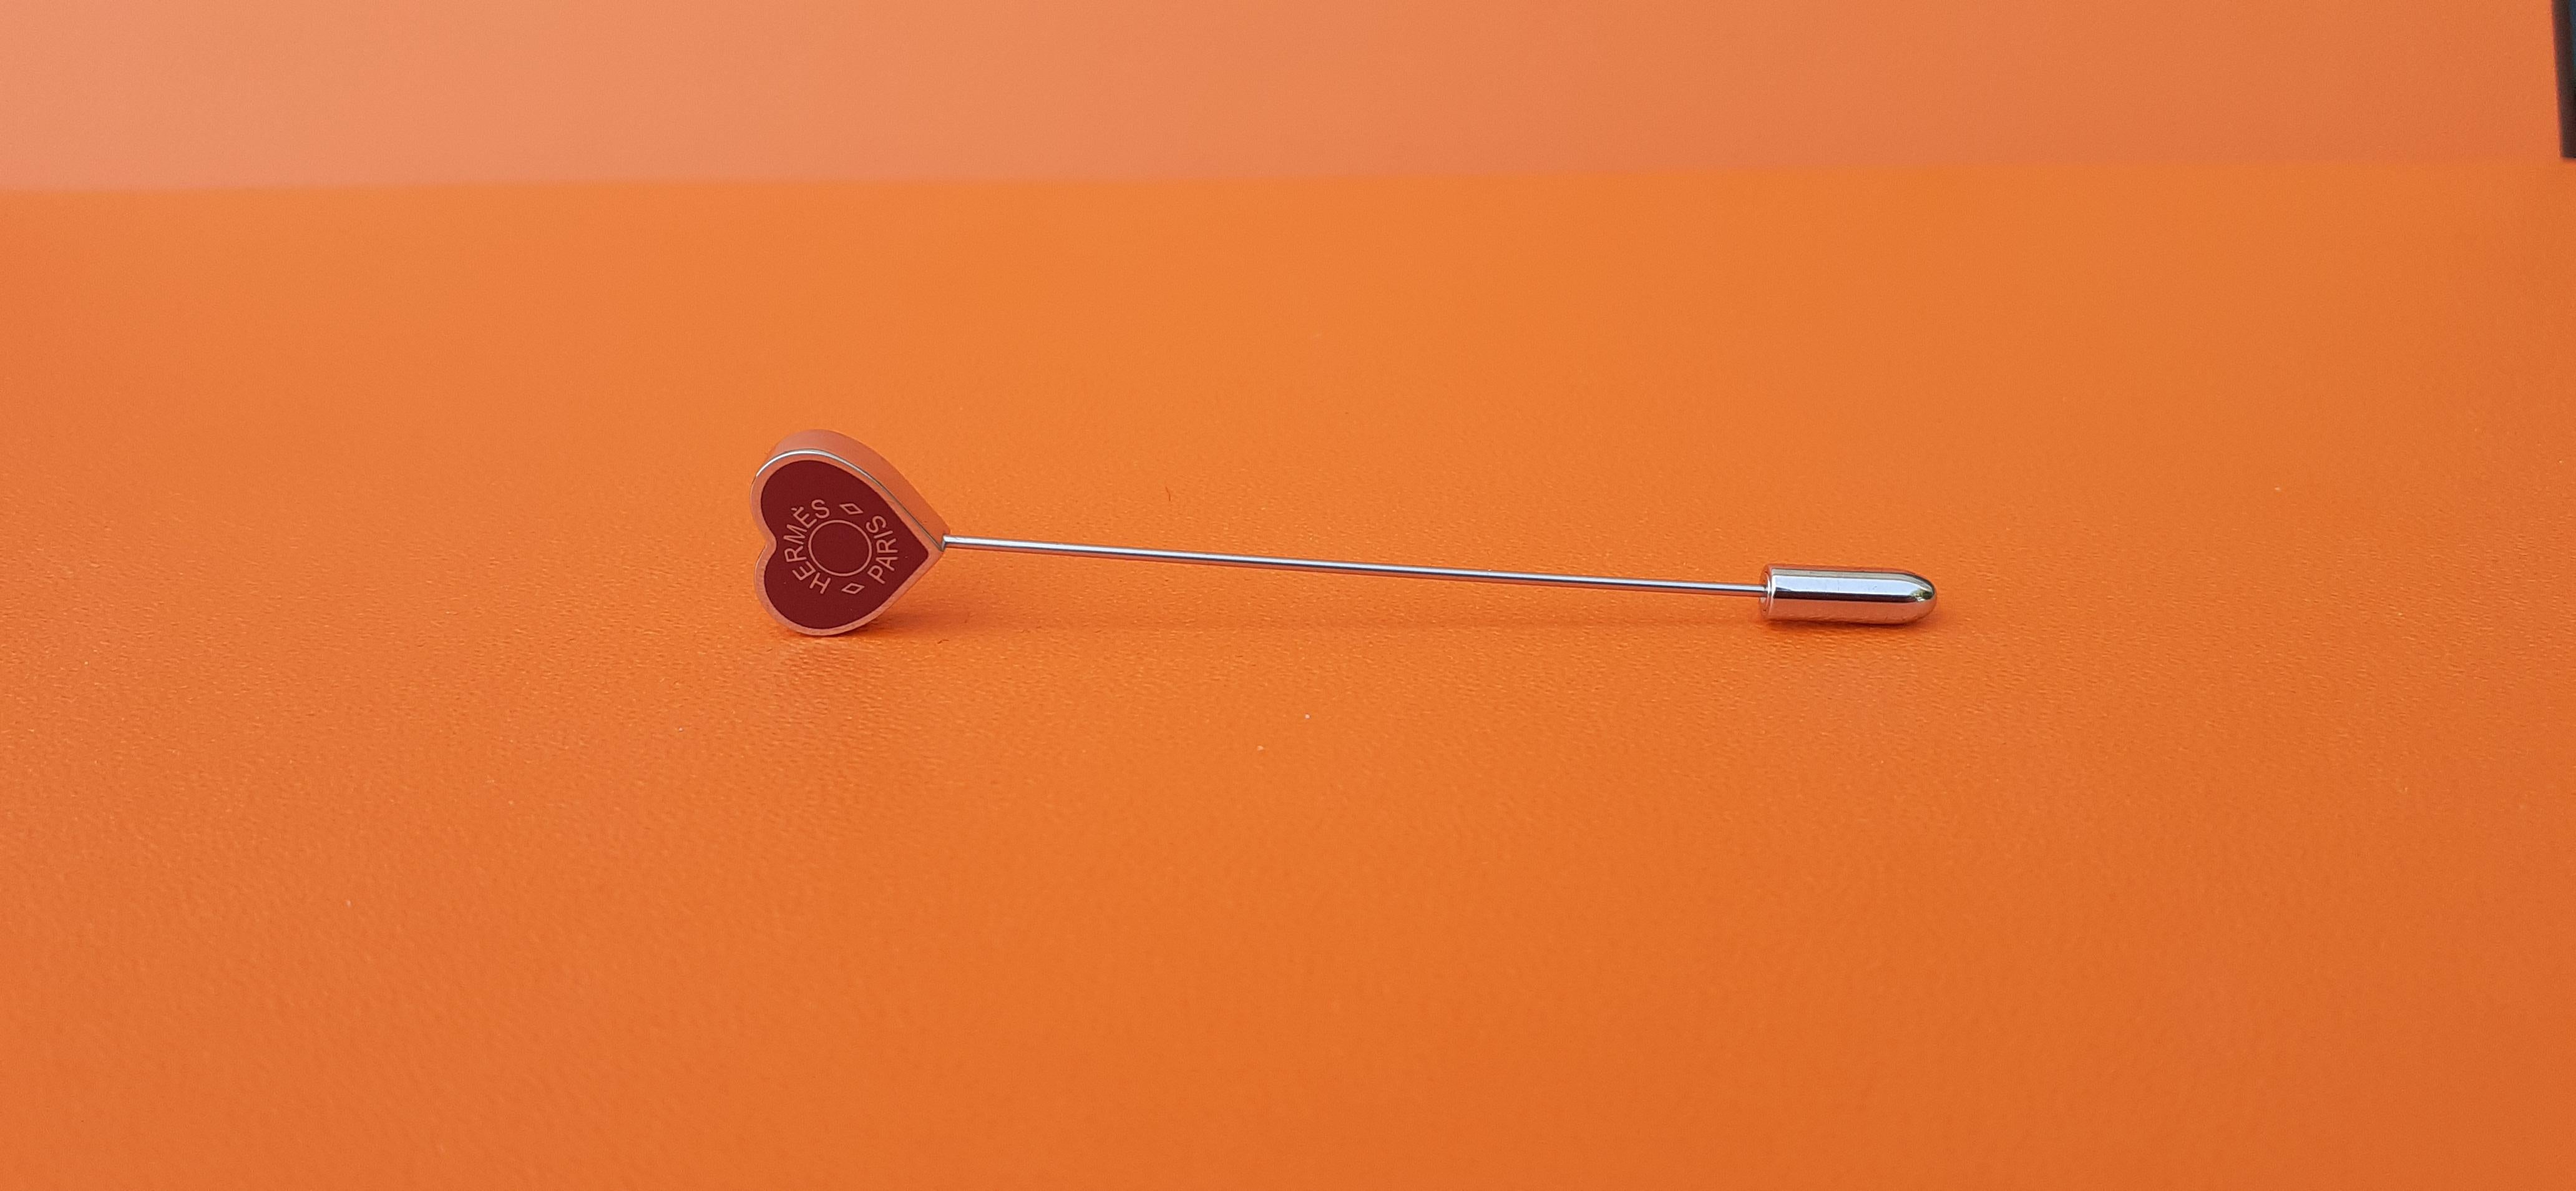 Cute Authentic Hermès Pin

Heart-shaped Clou de selle

Can be used as pin, brooch, wherever you want

Made in France

Made of lacquered palladium plated metal with and stainless steel pin

Colorways: Burgundy, Silver-Tone

Measurements: 
- Total